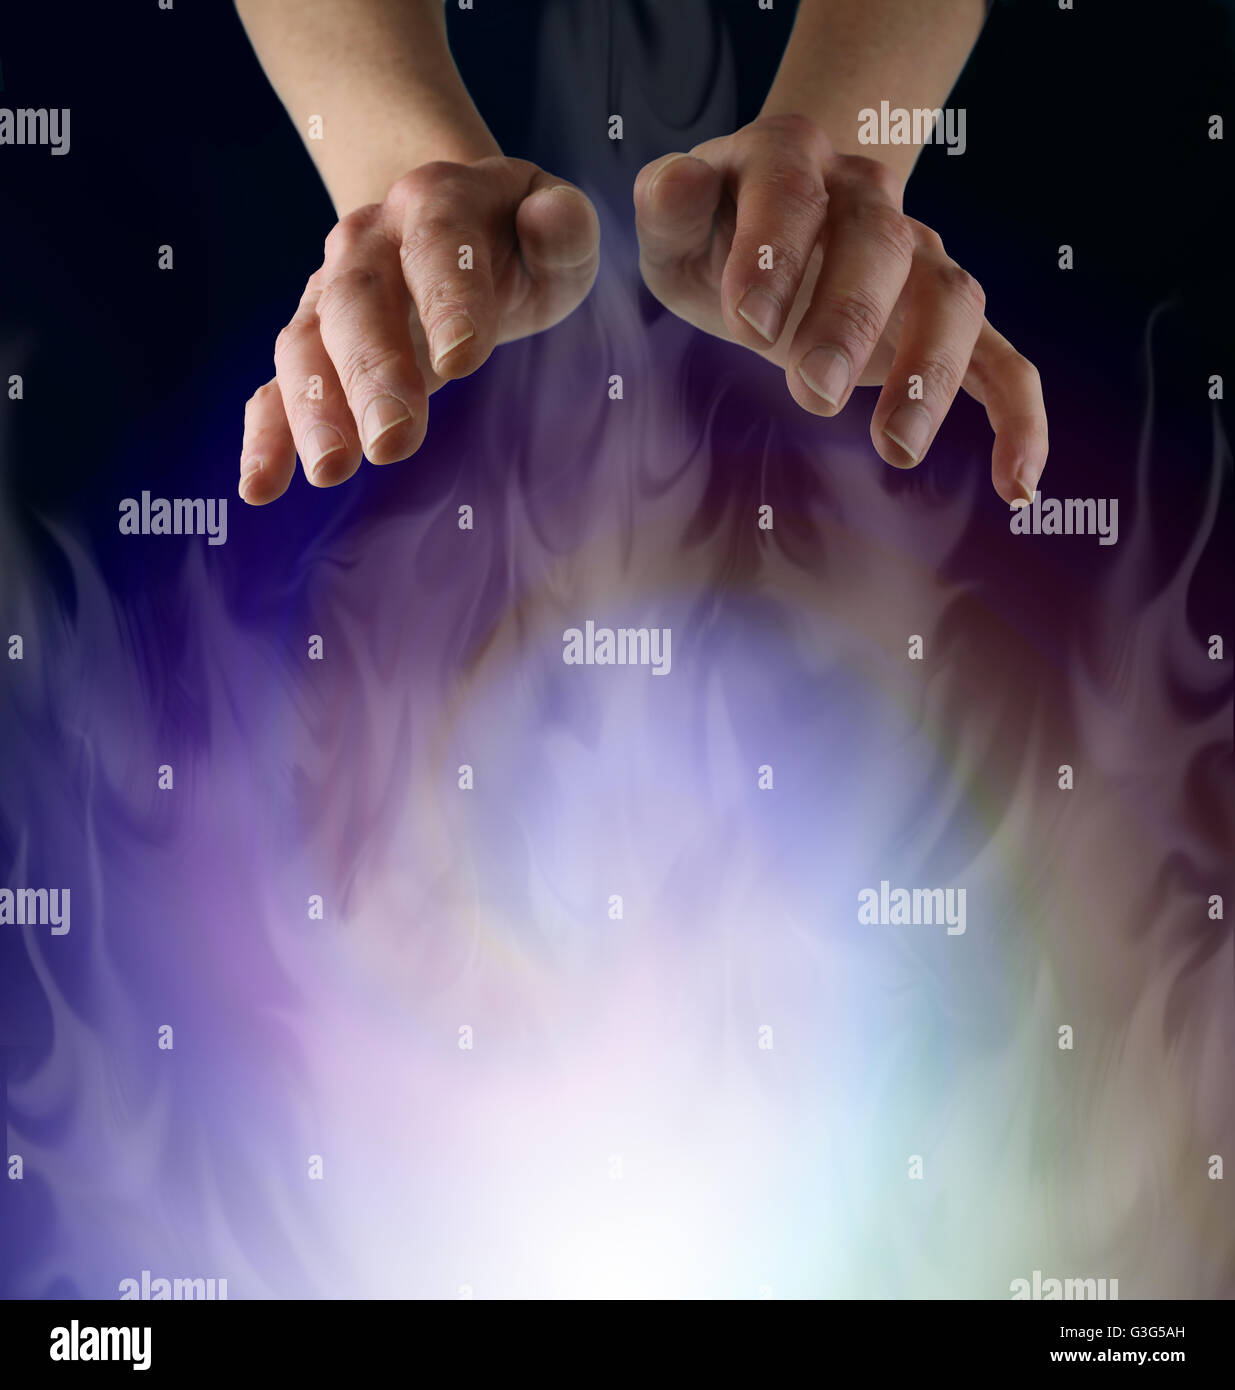 Spirit Matter - Pair of female hands hovering over a misty ethereal energy field on a black background with plenty of copy space Stock Photo